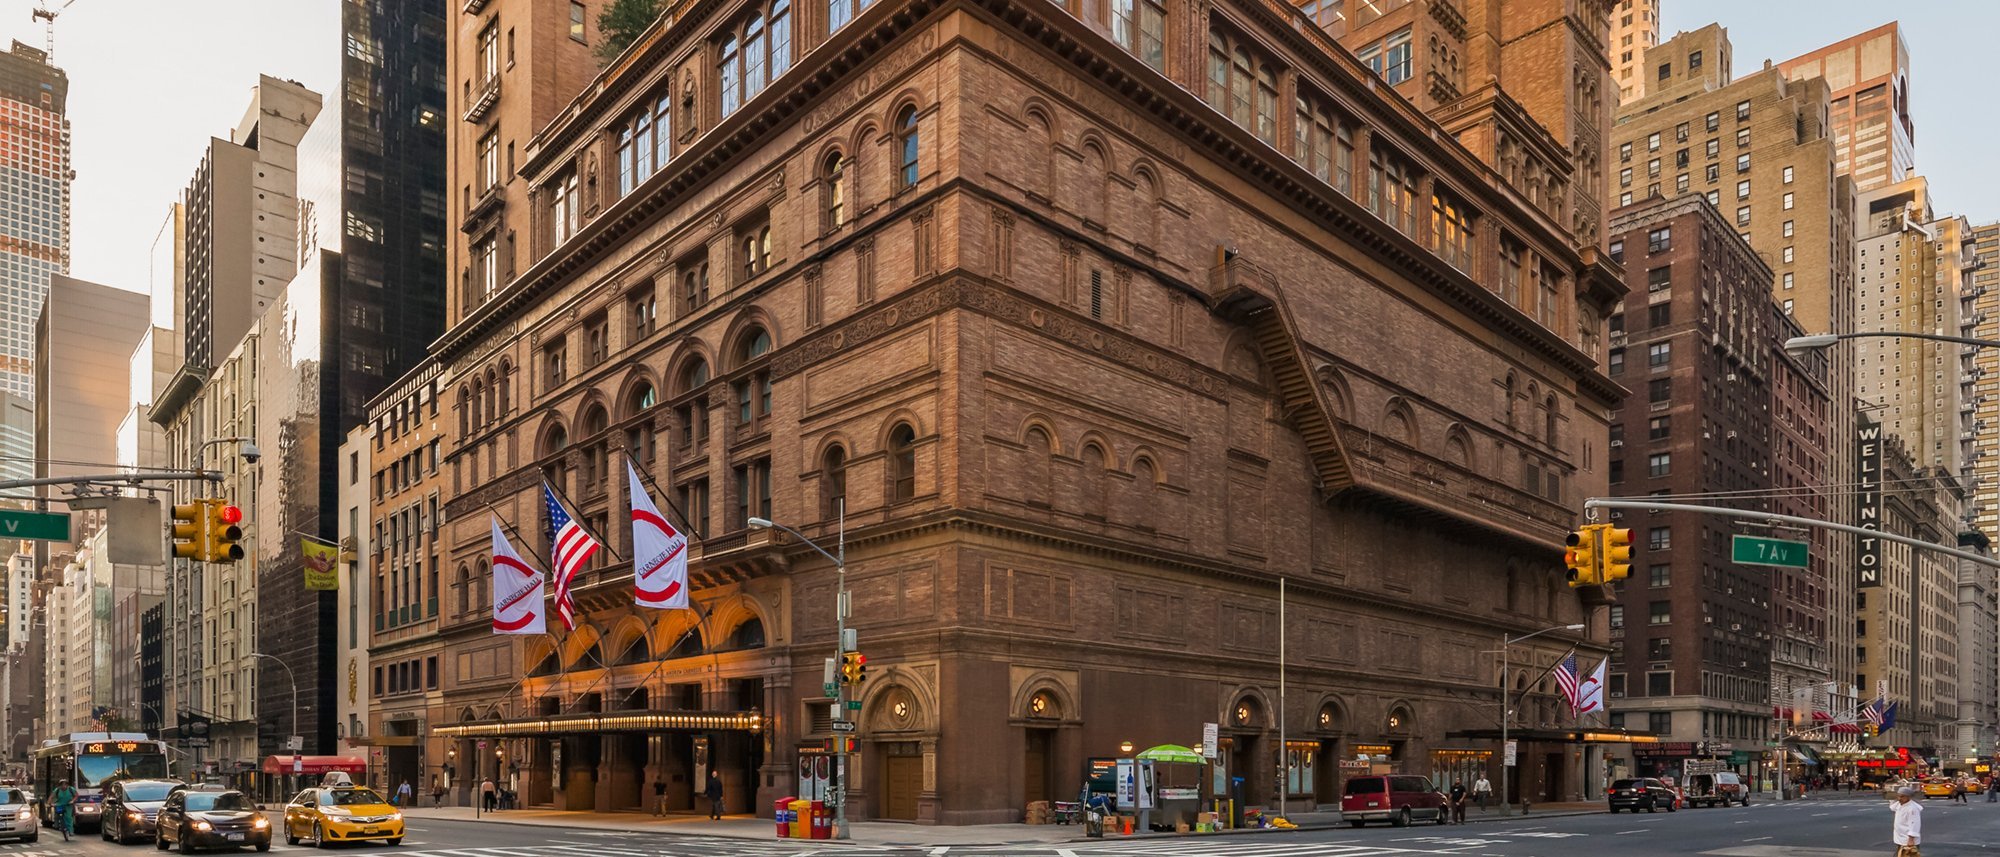 Facade of Carnegie Hall in New York